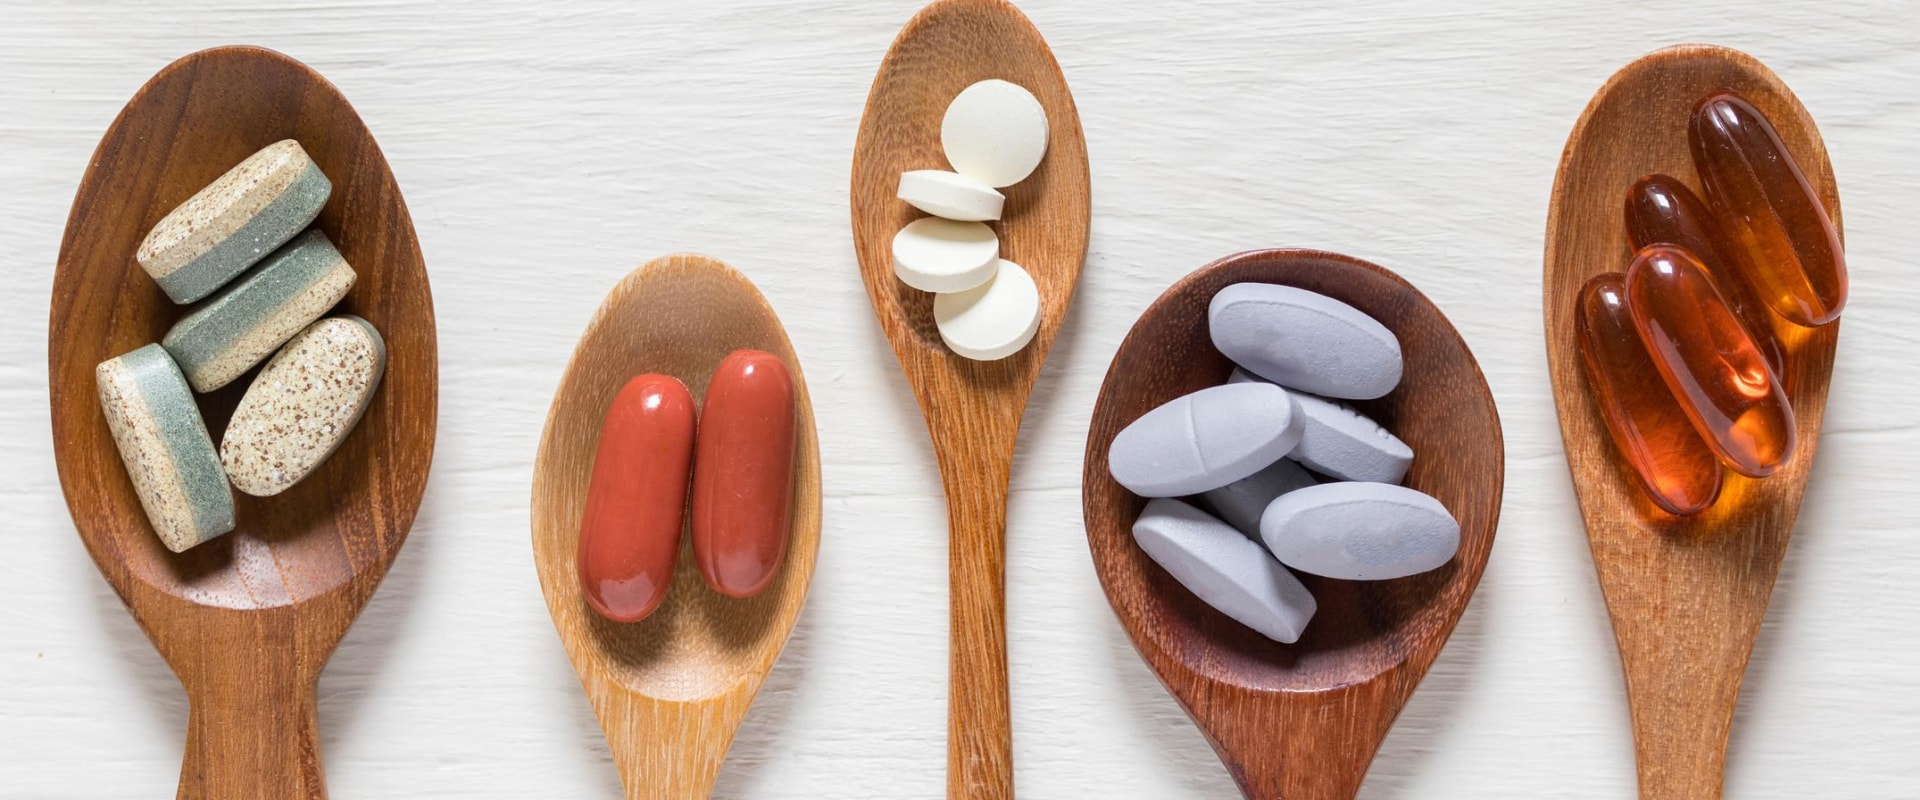 What are Nutritional Supplements Used For?